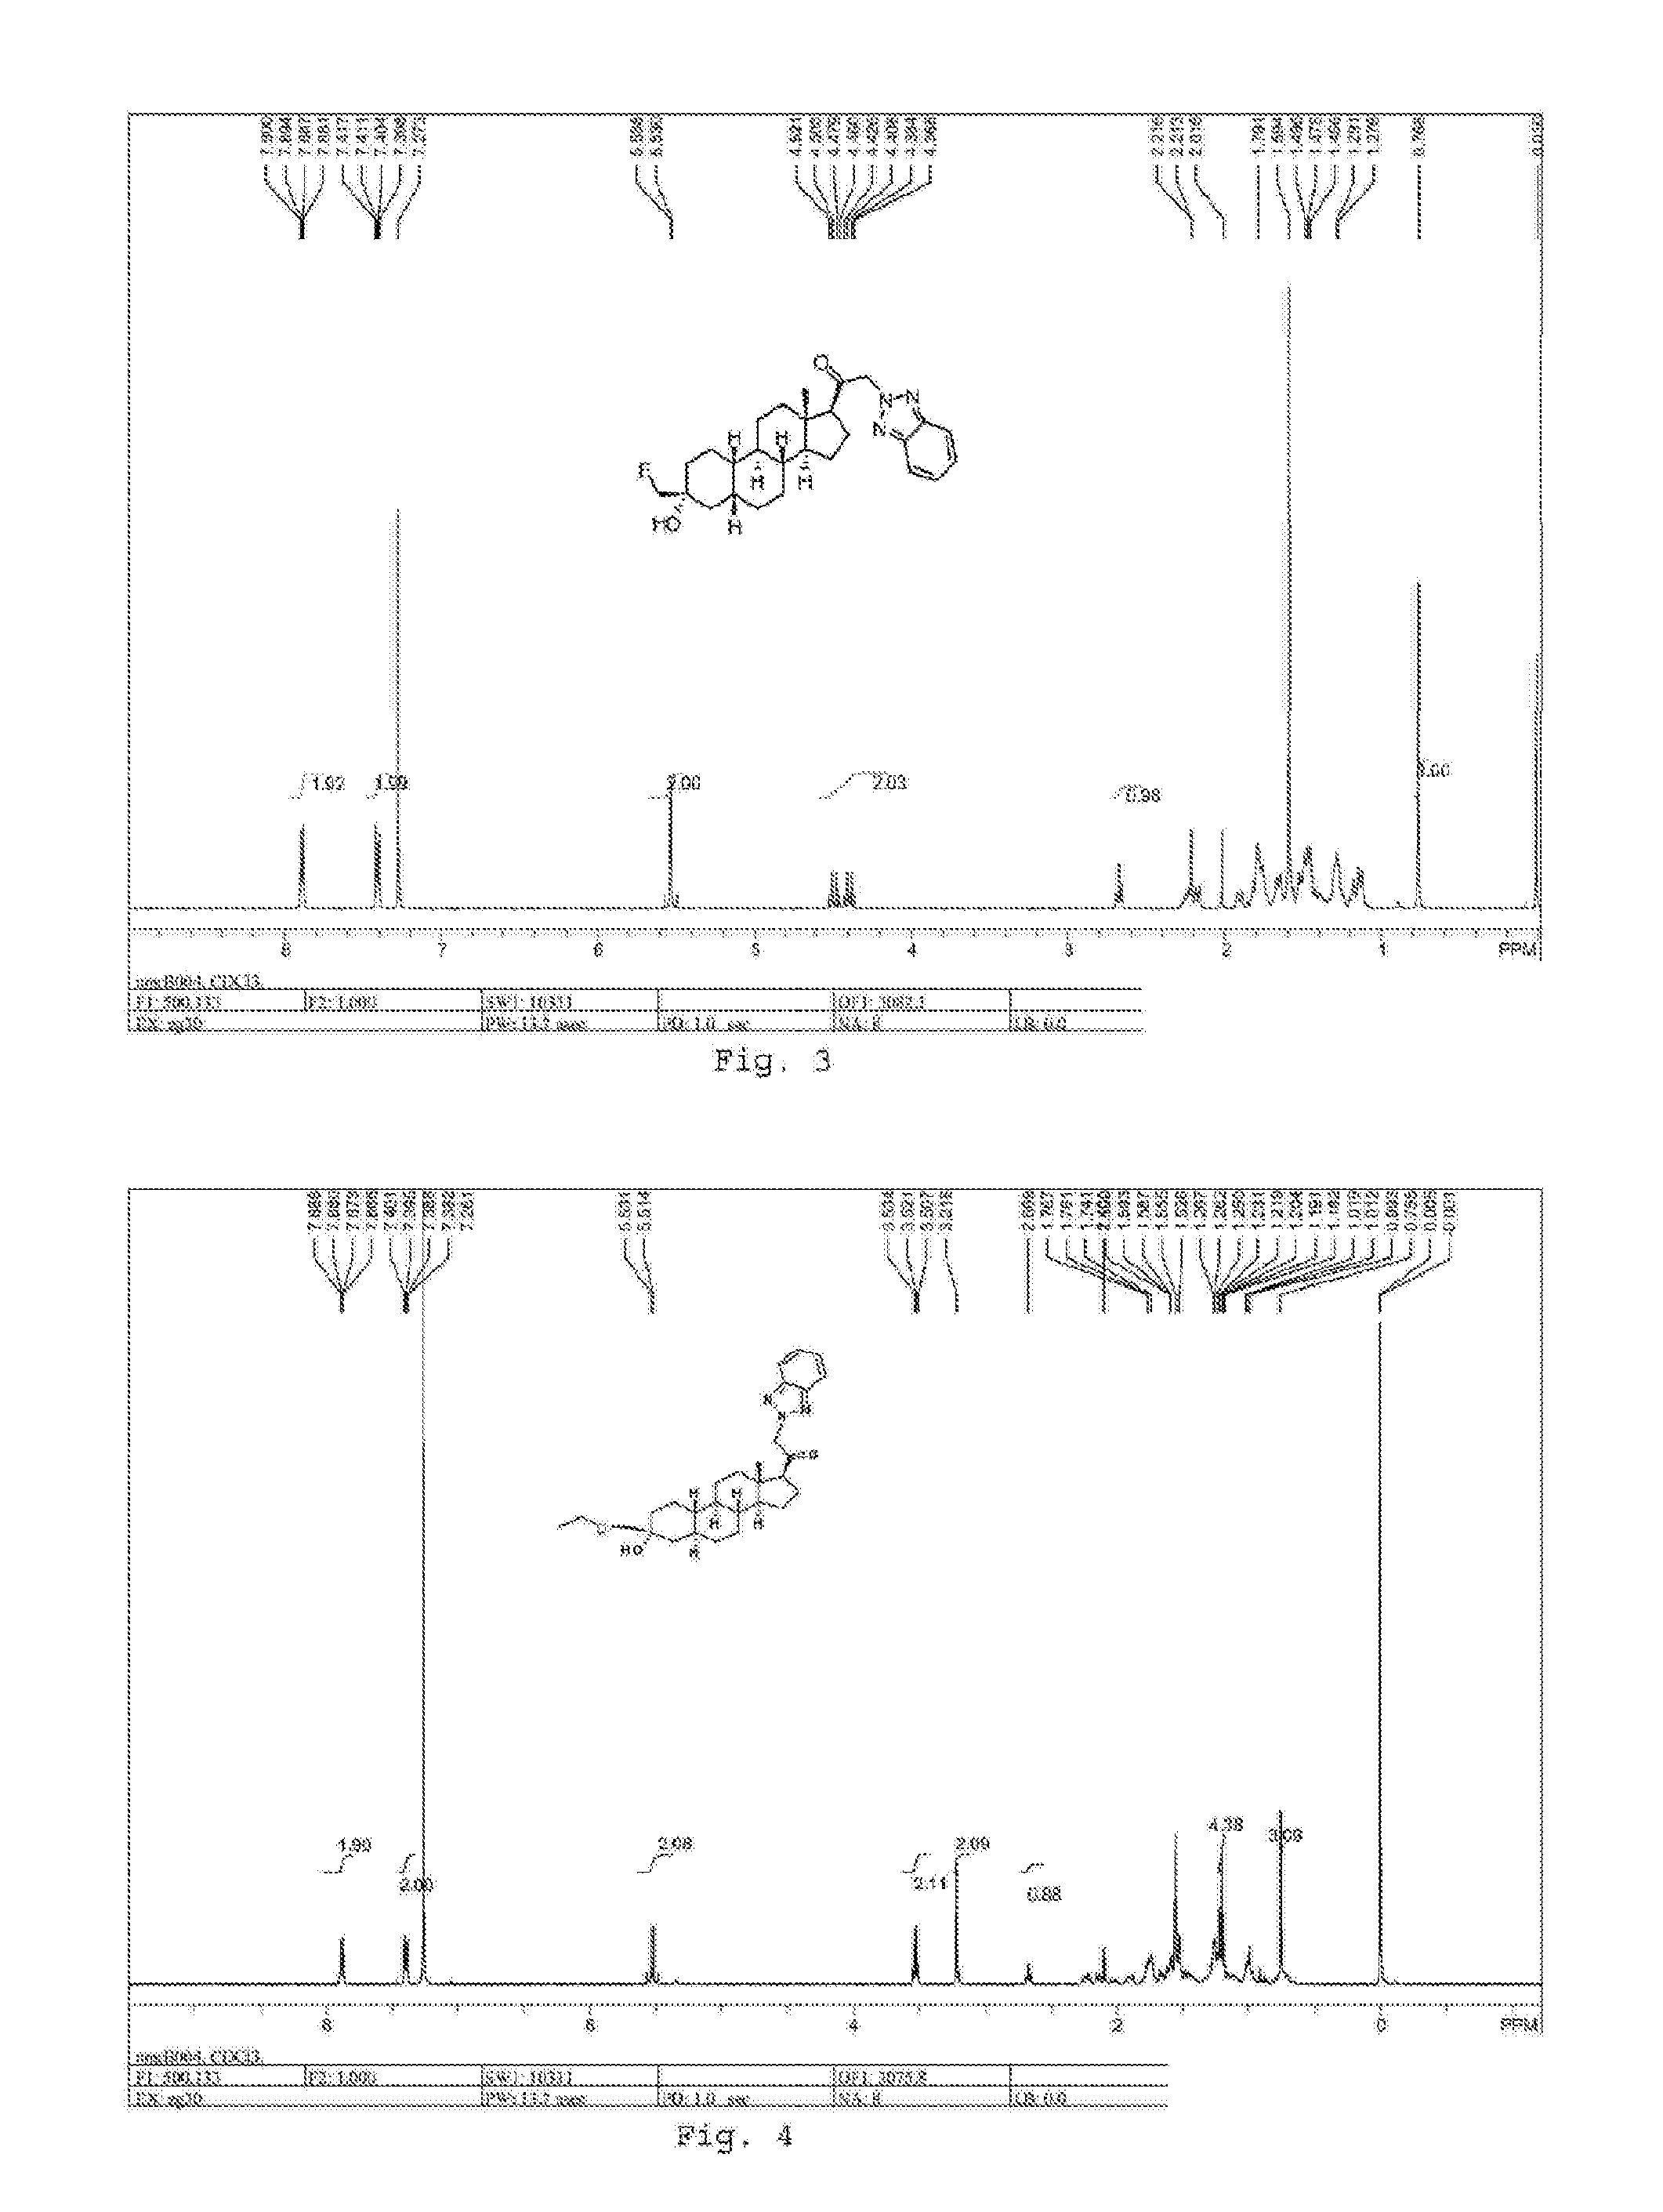 19-nor neuroactive steroids and methods of use thereof